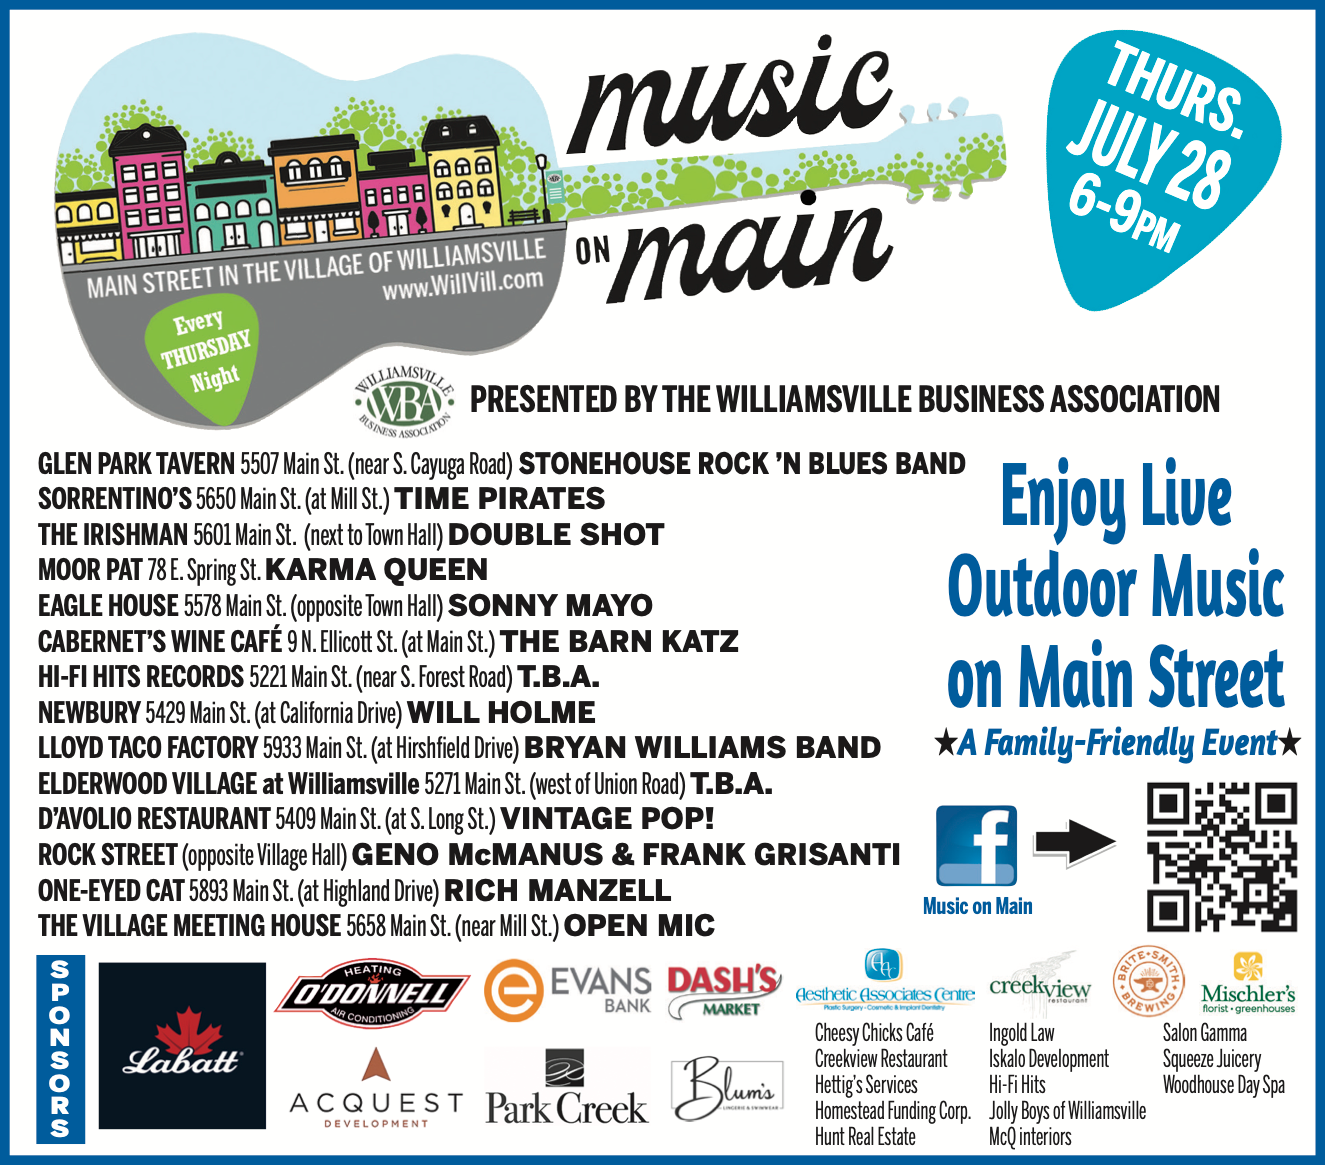 2022- Music on Main Street in Williamsville, NY -Mike and Mandy